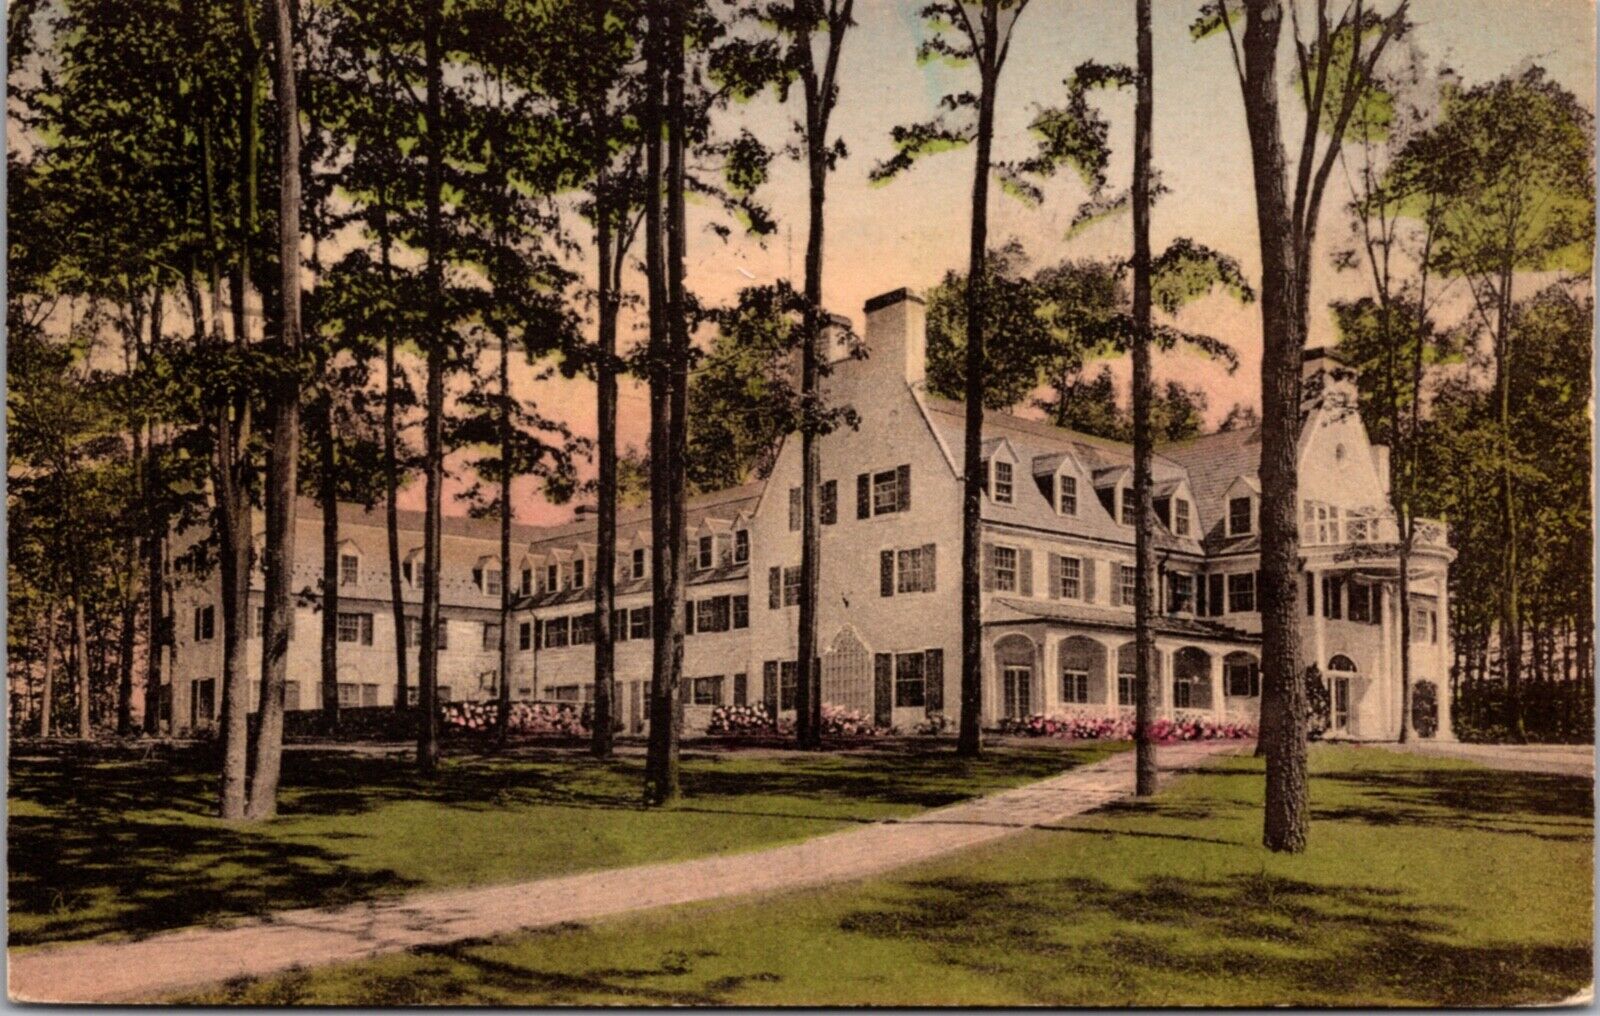 Hand Colored Postcard The Nittany Lion Inn in State College, Pennsylvania